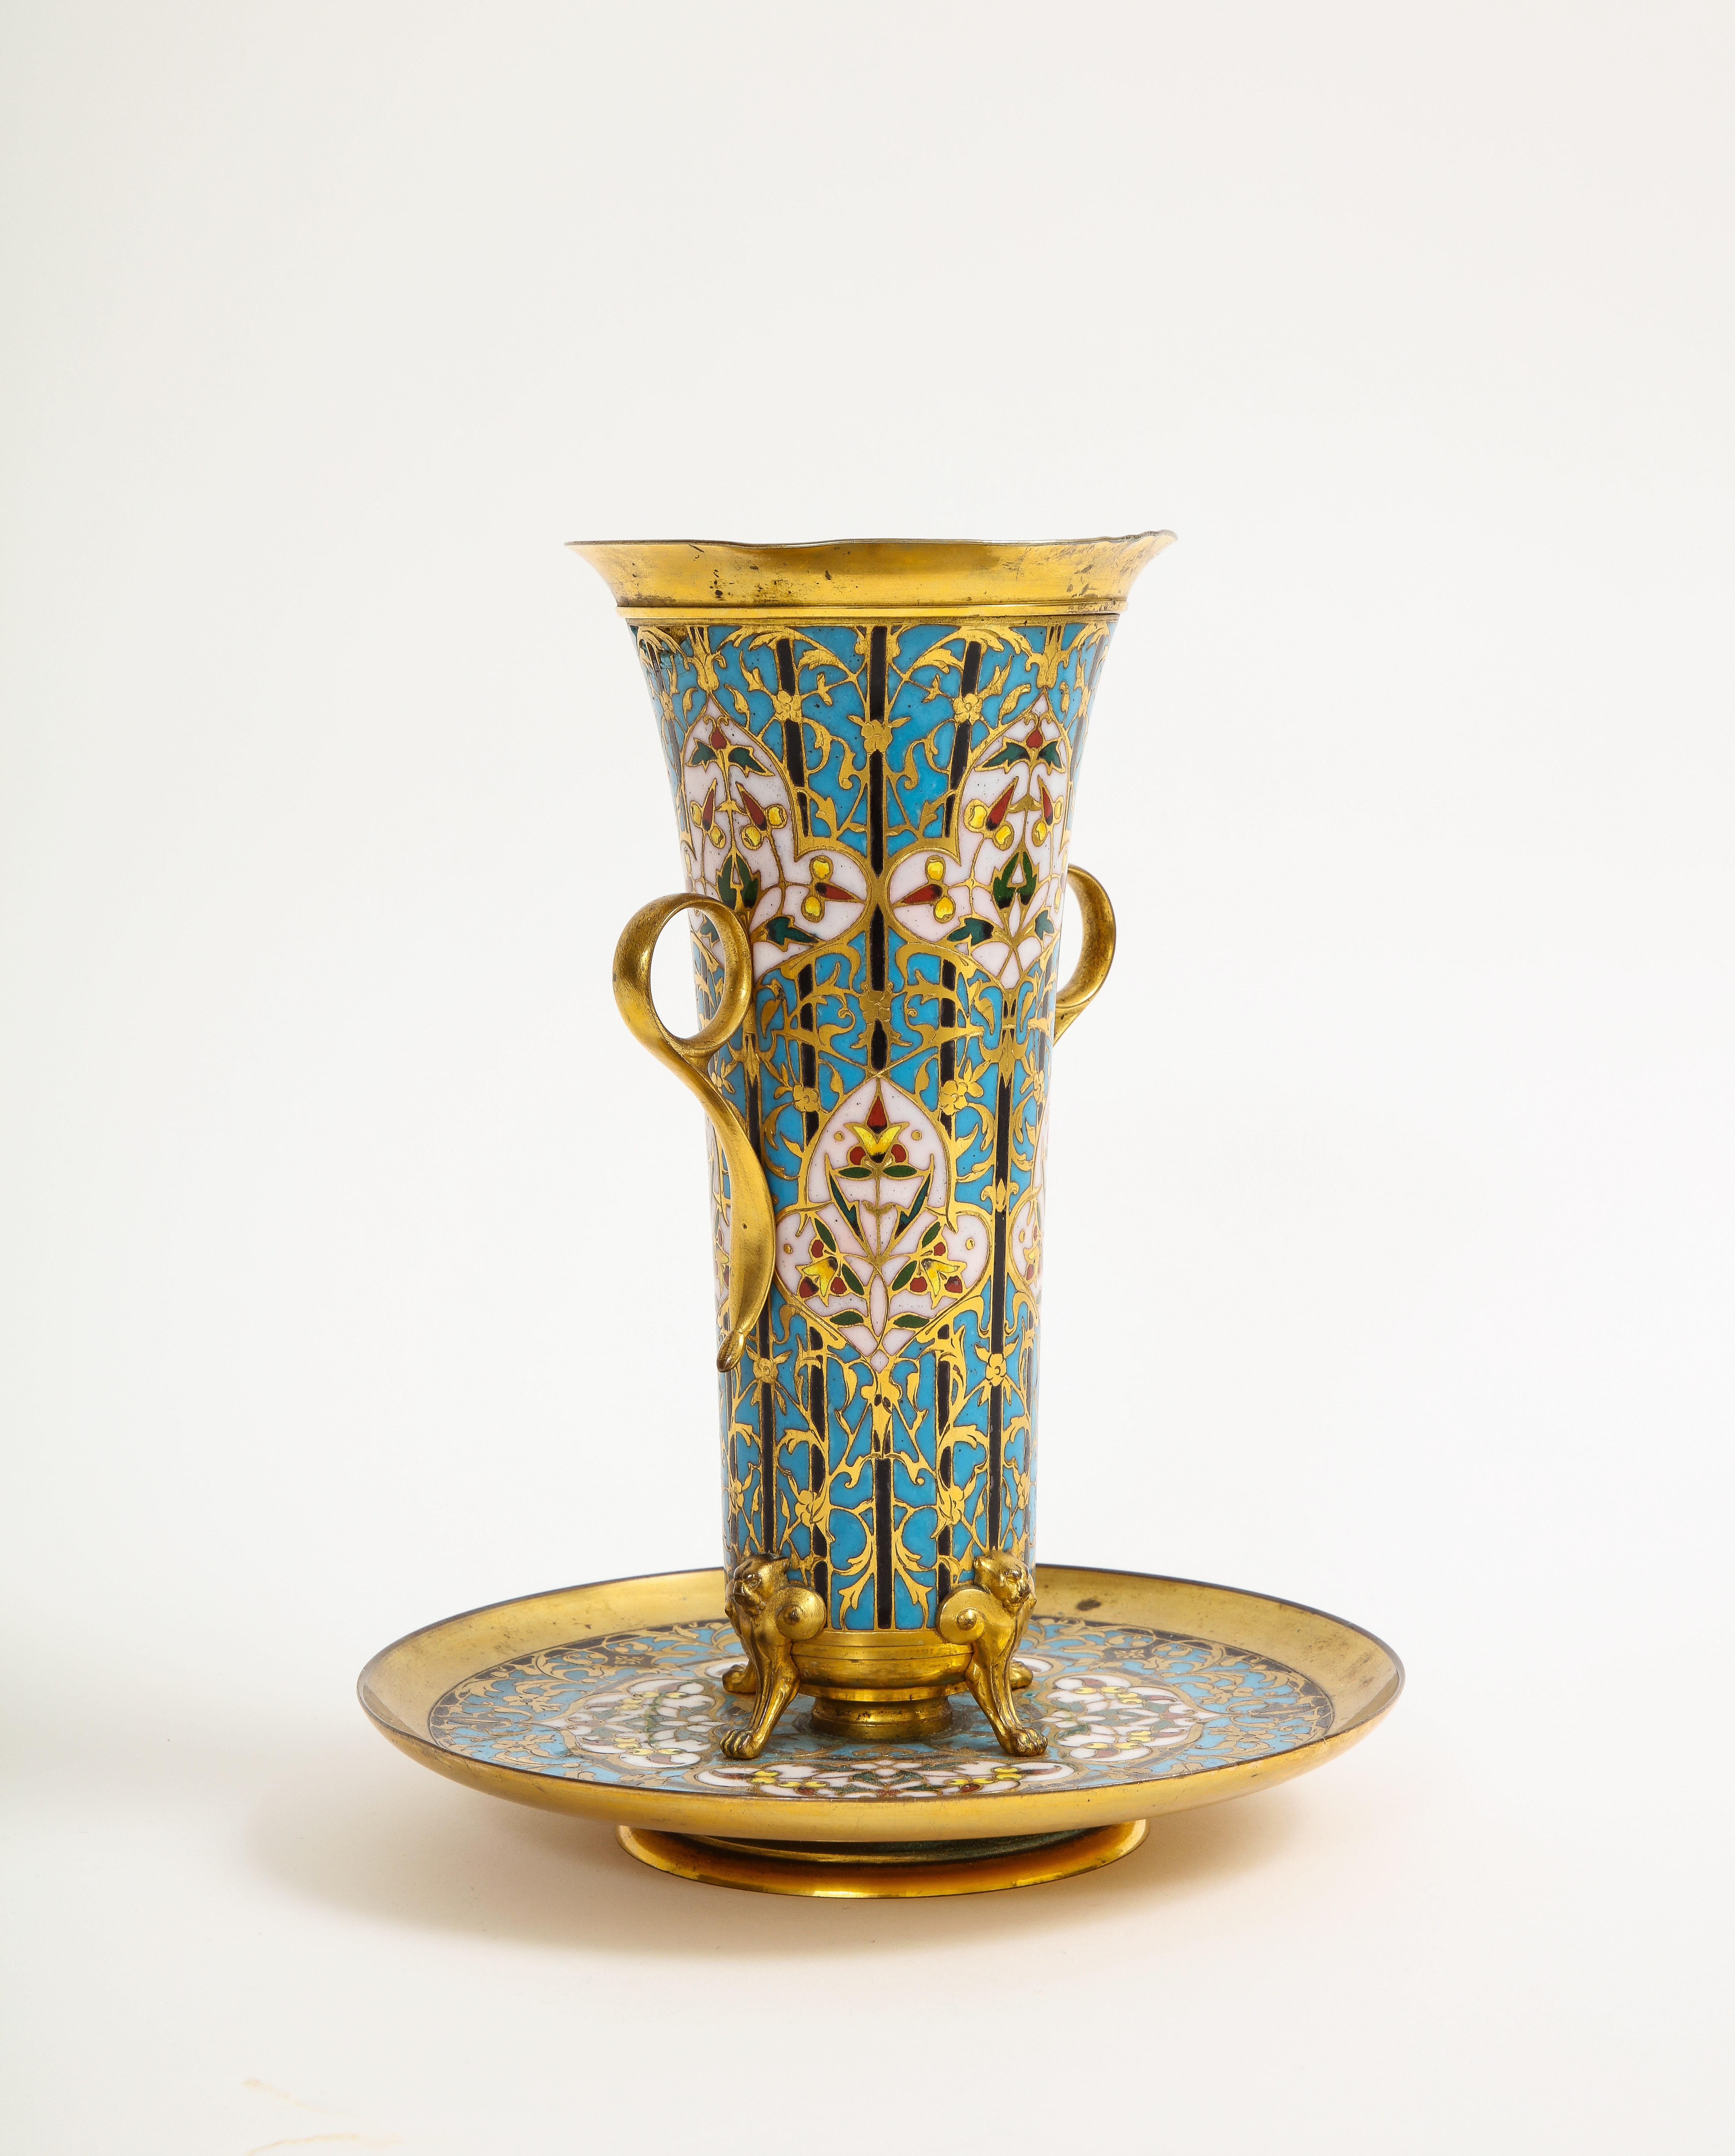 19th C. French Islamic Champleve Enamel Vase and Underplate, Signed Barbedienne For Sale 2